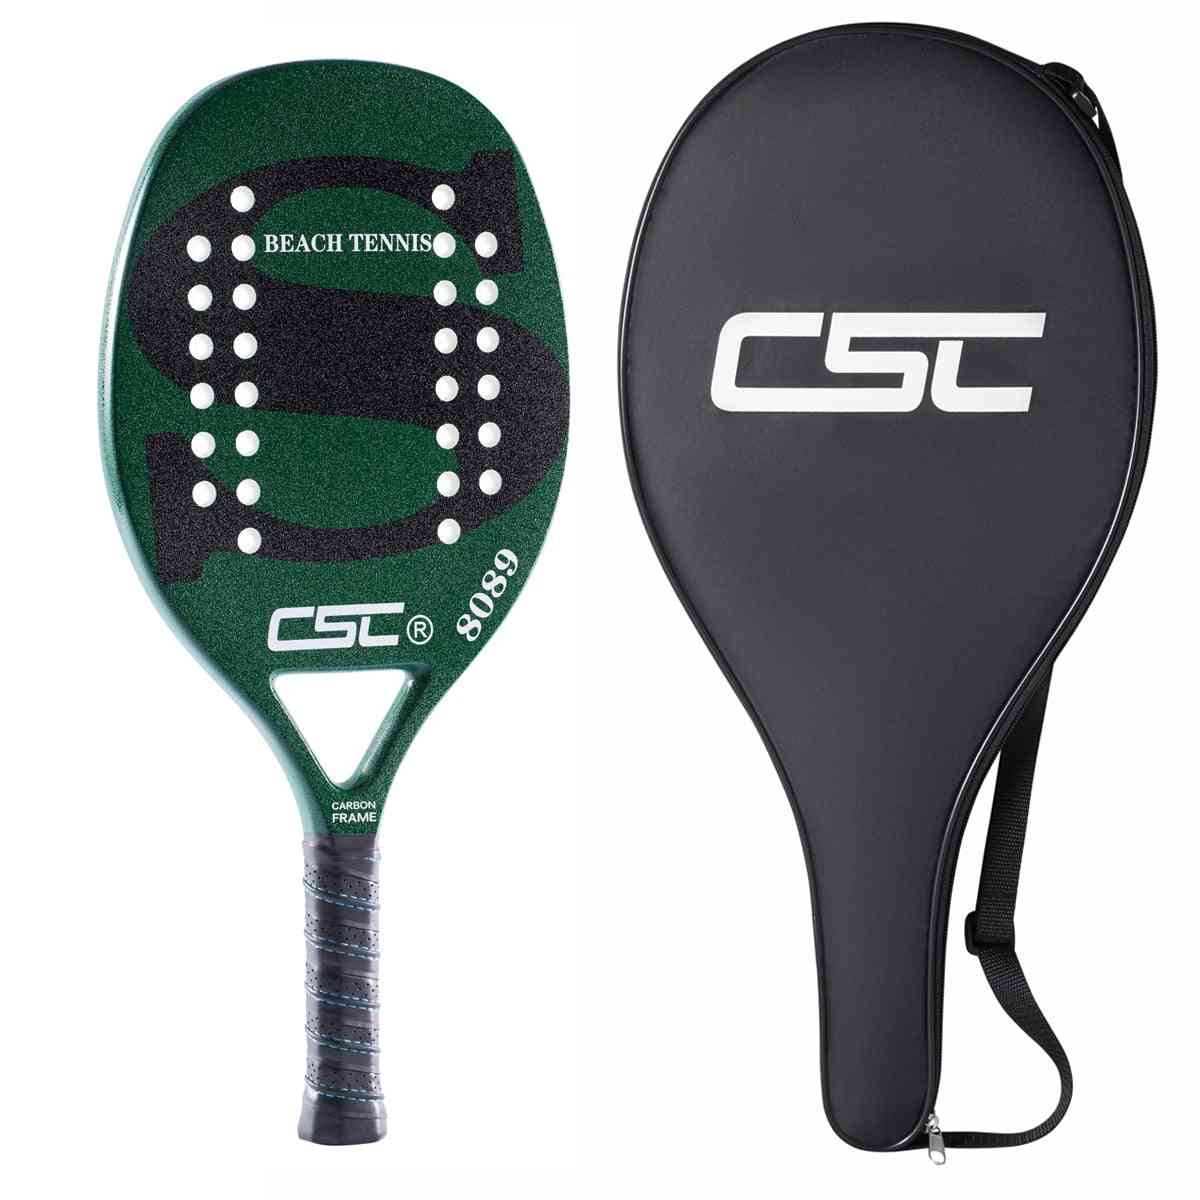 Professional Carbon And Glass Fiber Beach Tennis Racket With Bag